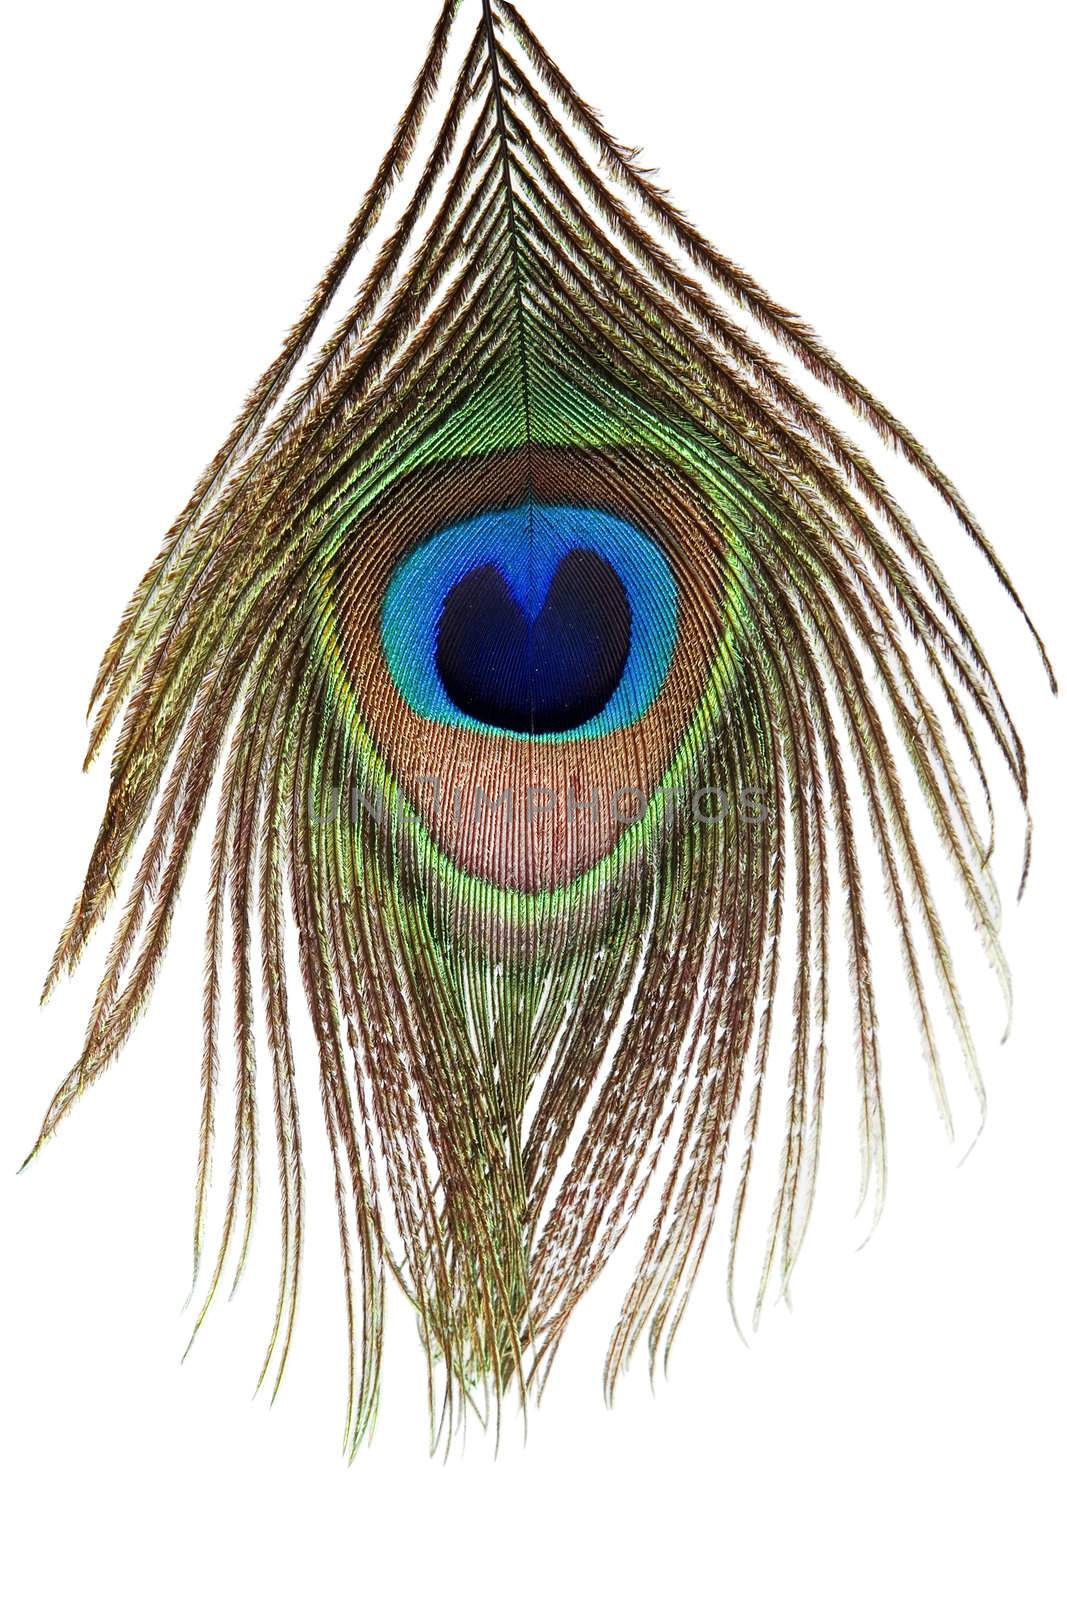 Detail of peacock feather eye on white background